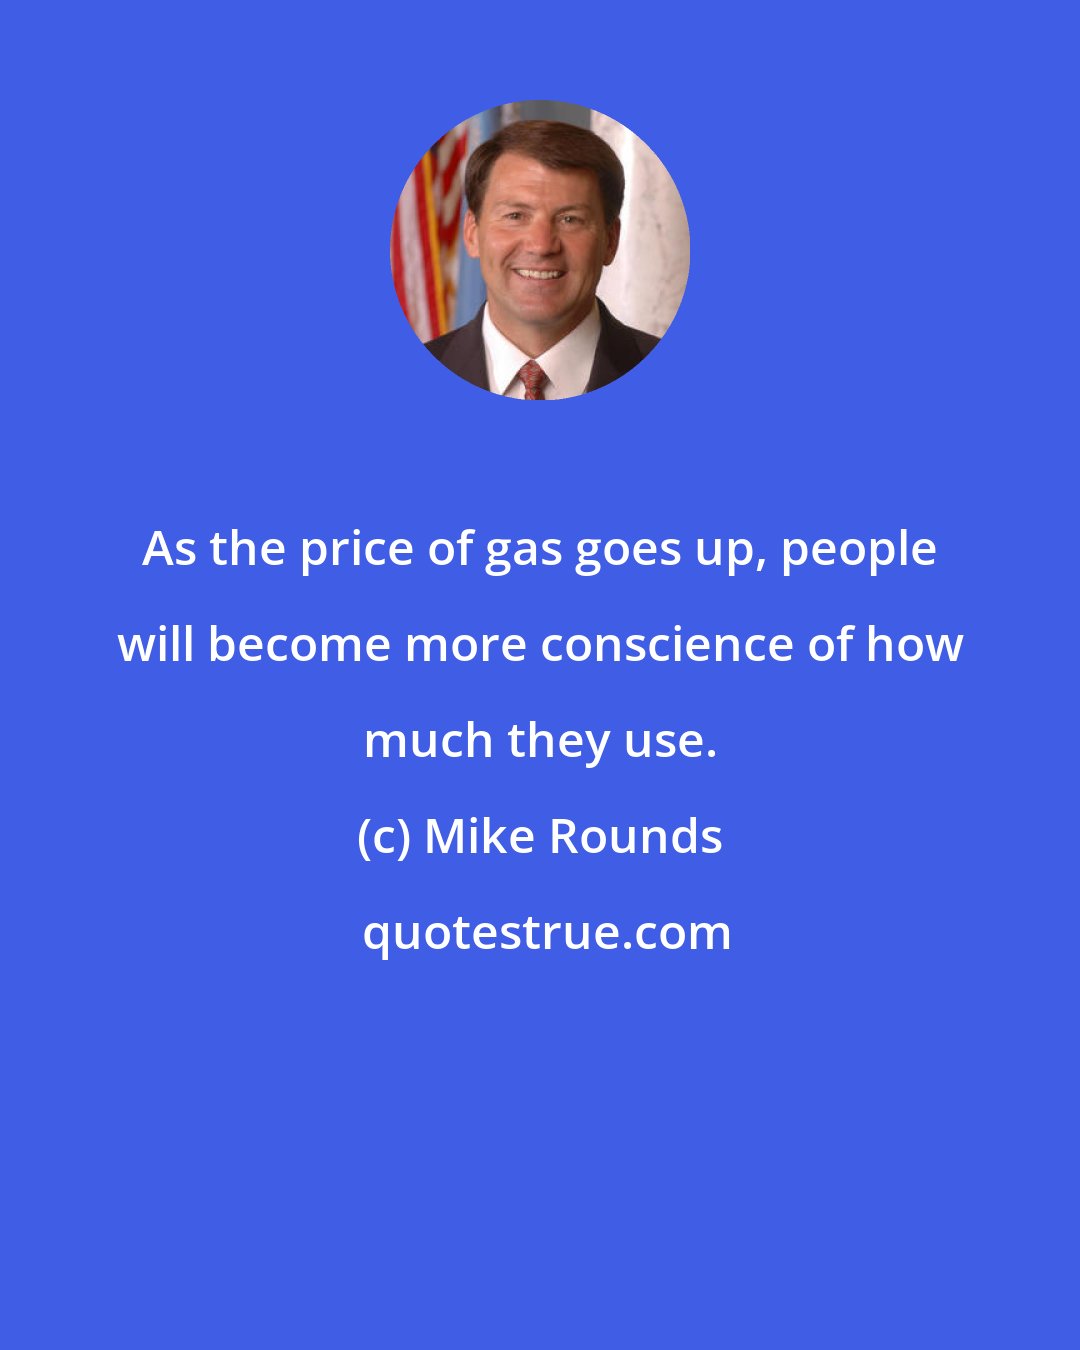 Mike Rounds: As the price of gas goes up, people will become more conscience of how much they use.